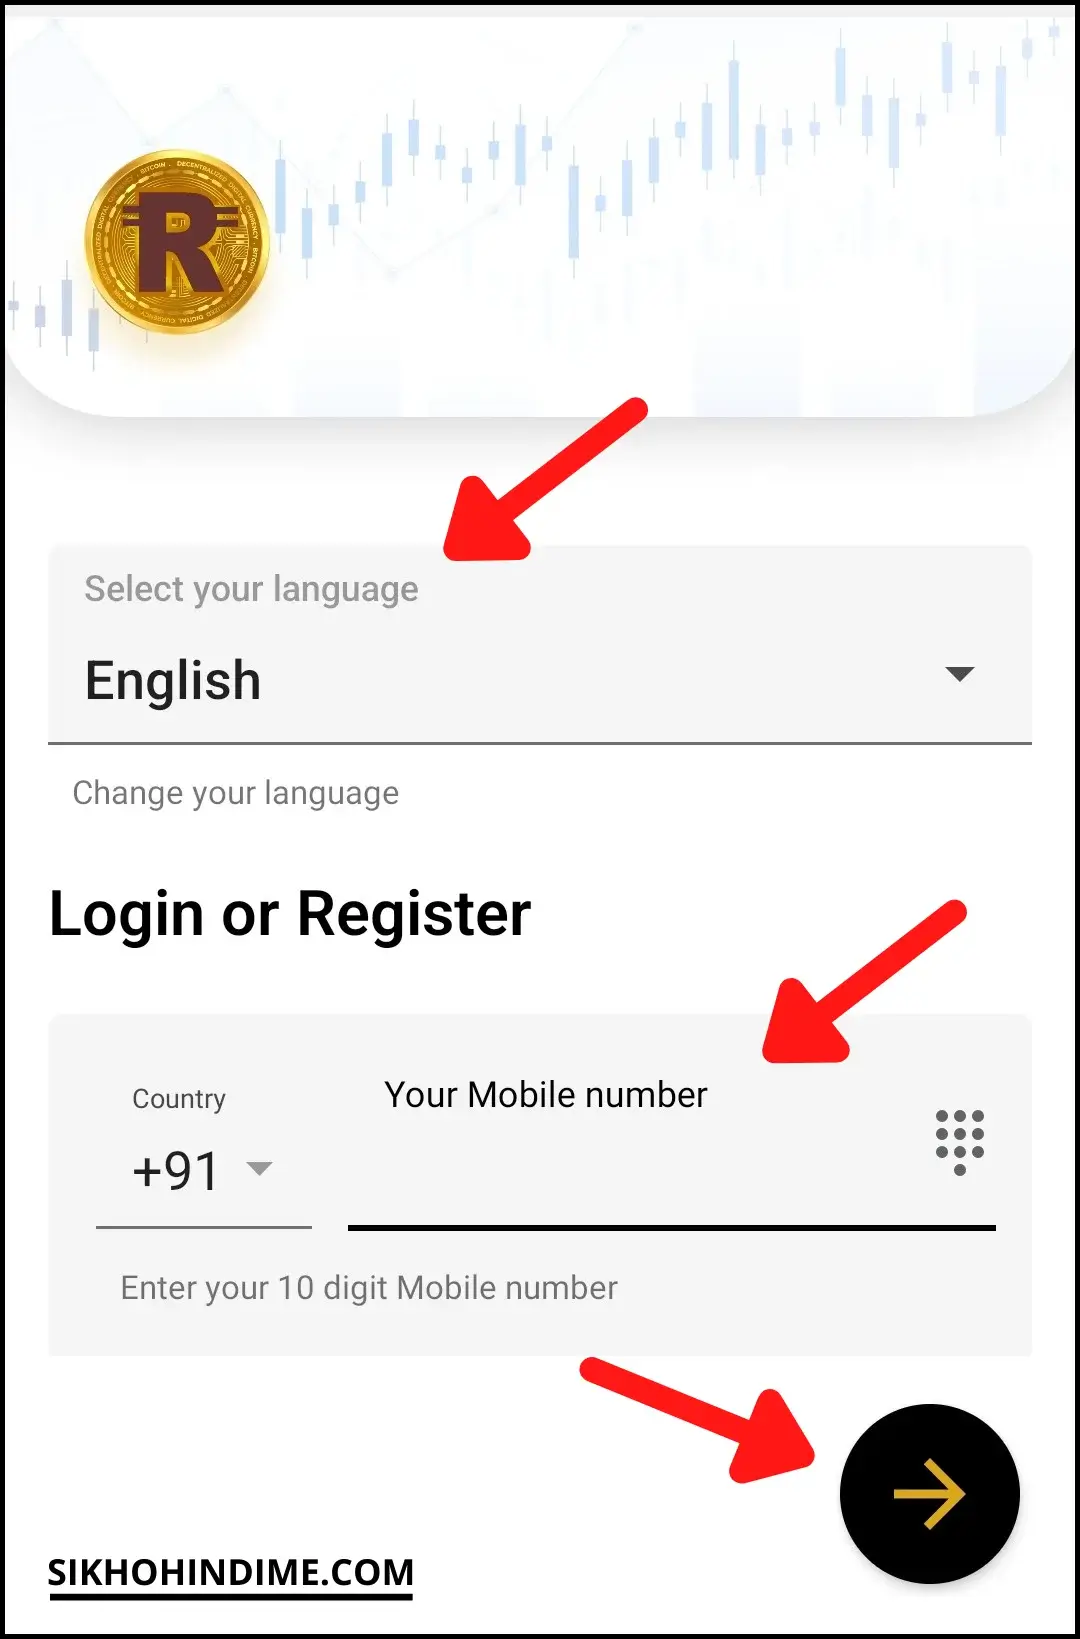 Select language, enter your mobile number, and click next